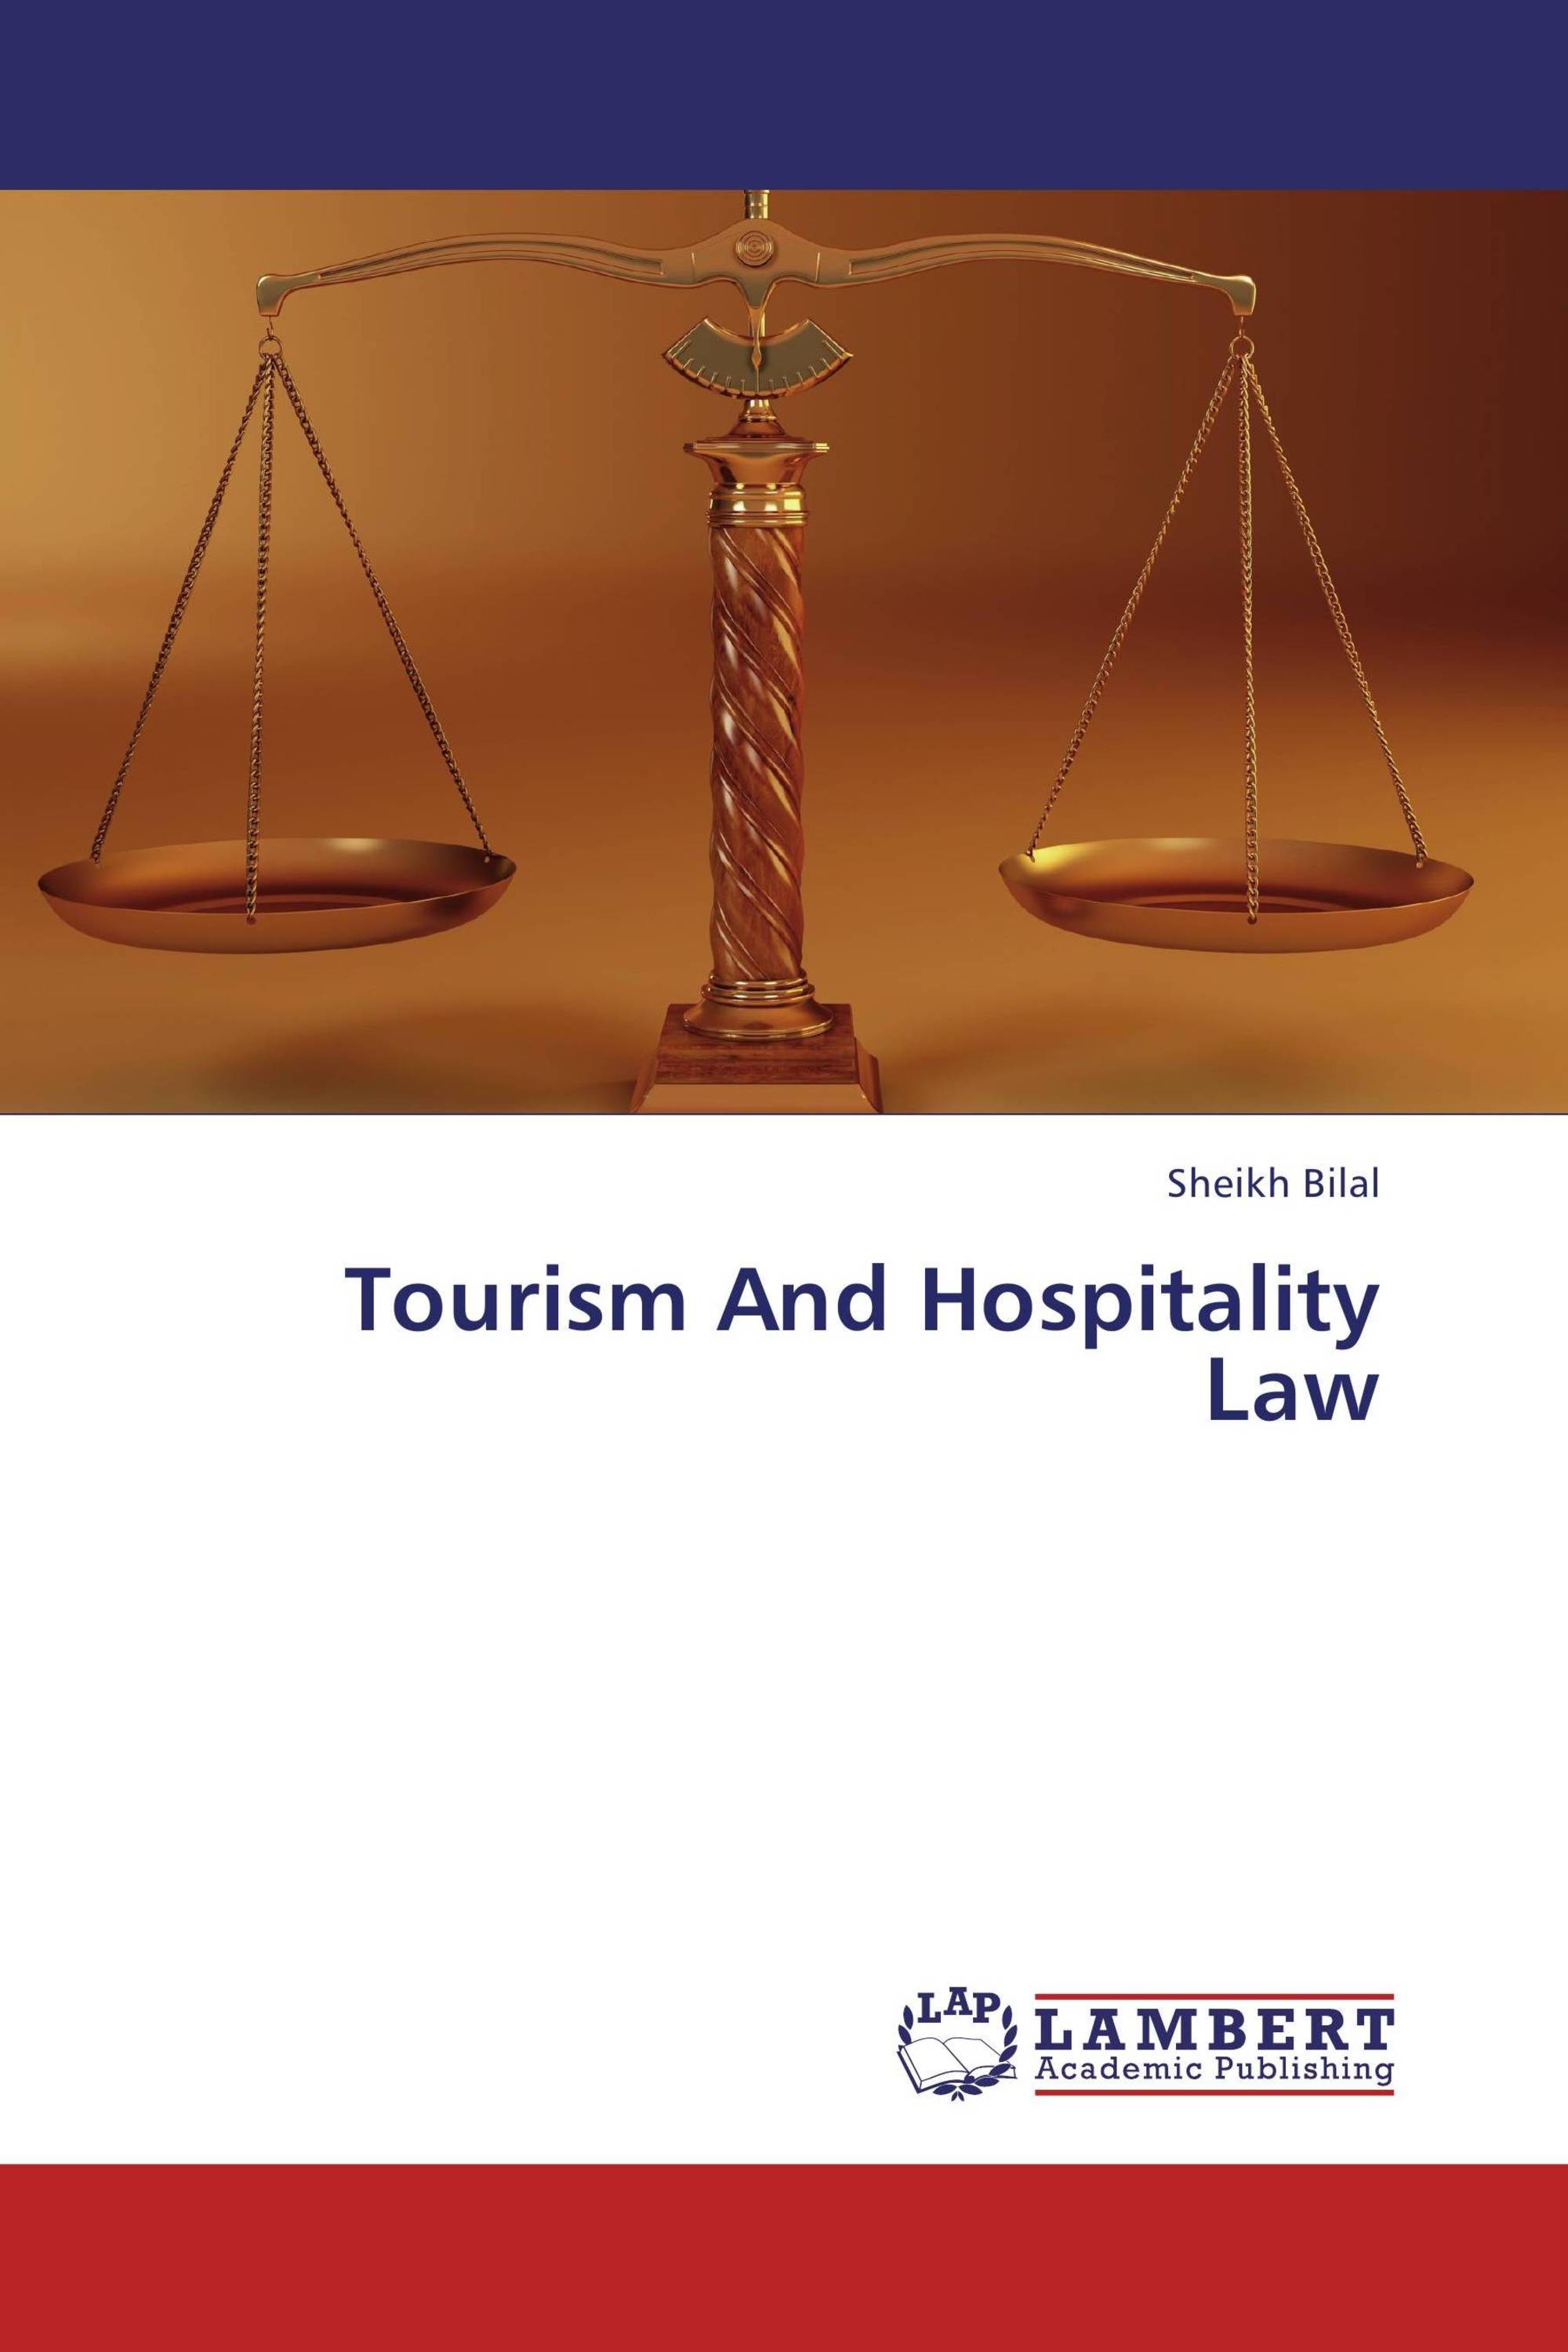 tourism and hospitality laws